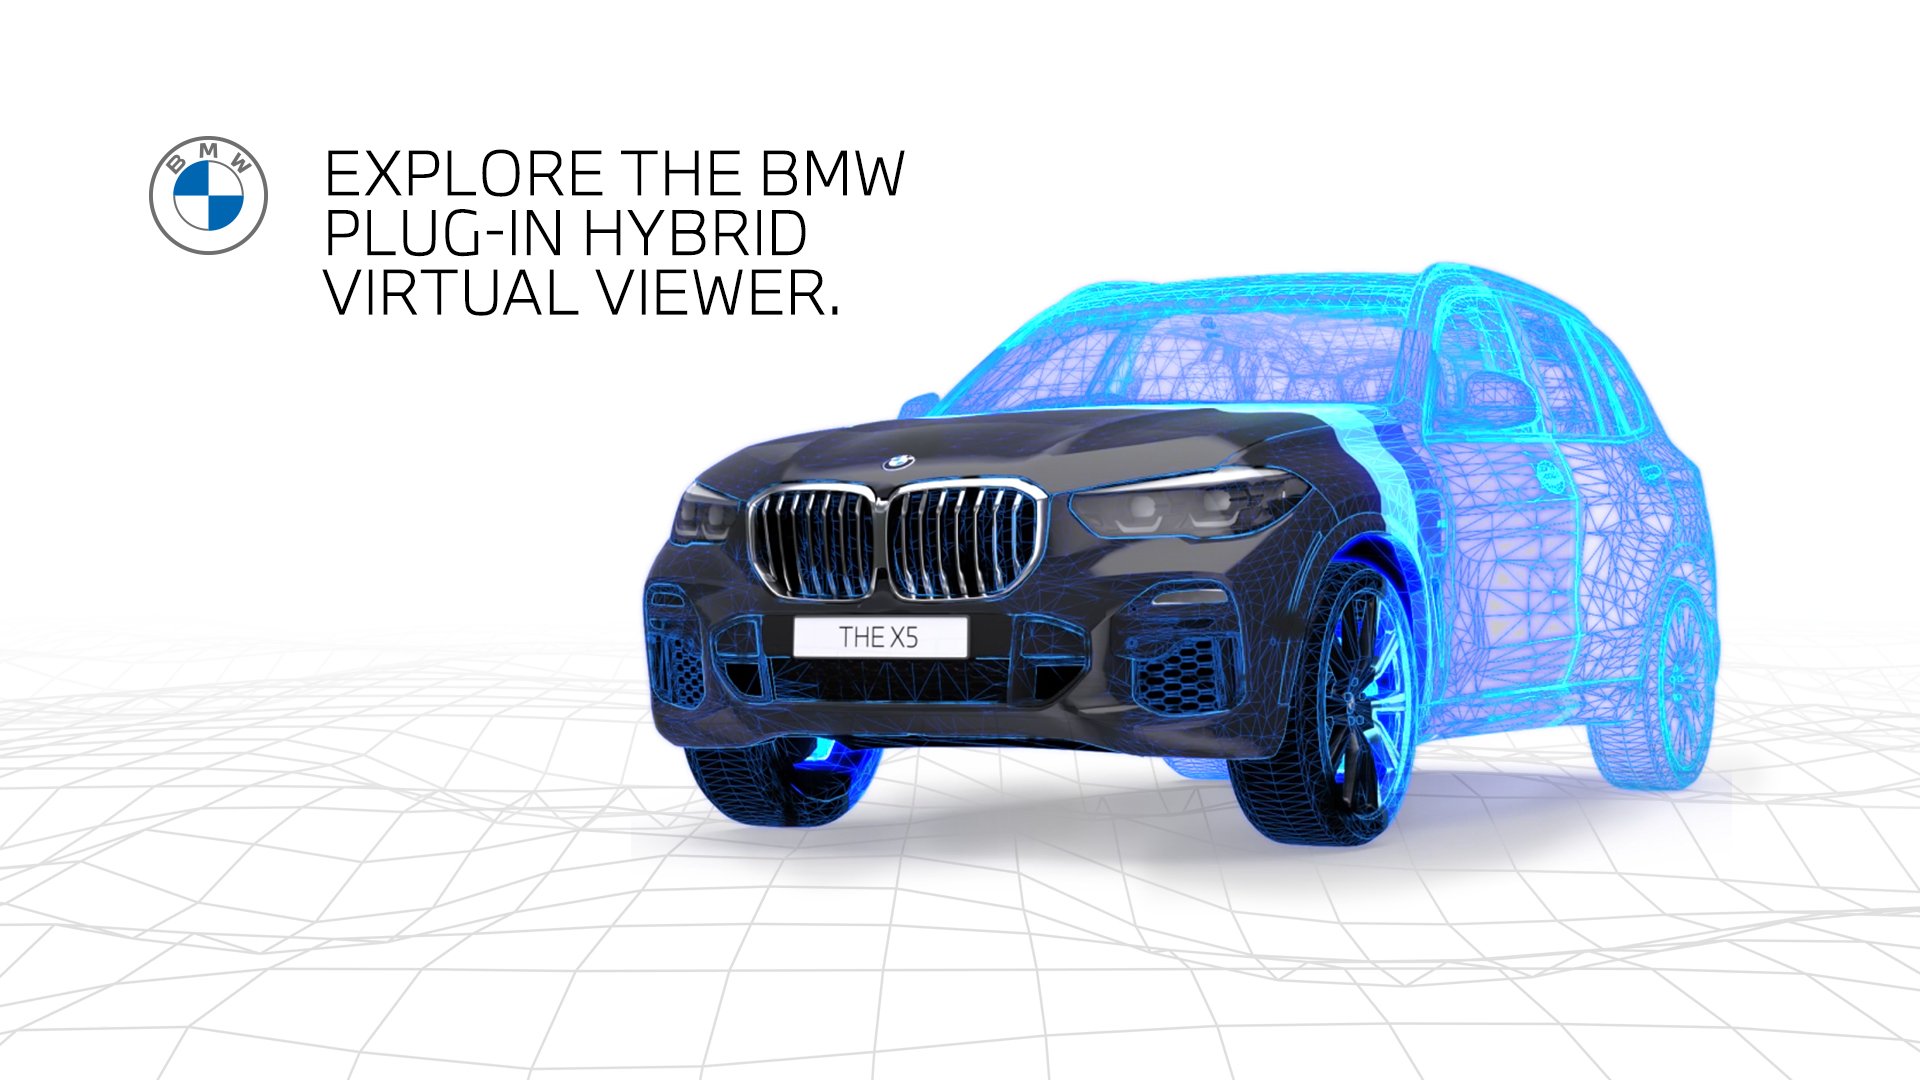 The BMW Virtual Viewer is the car brand’s first augmented reality tool in the UK